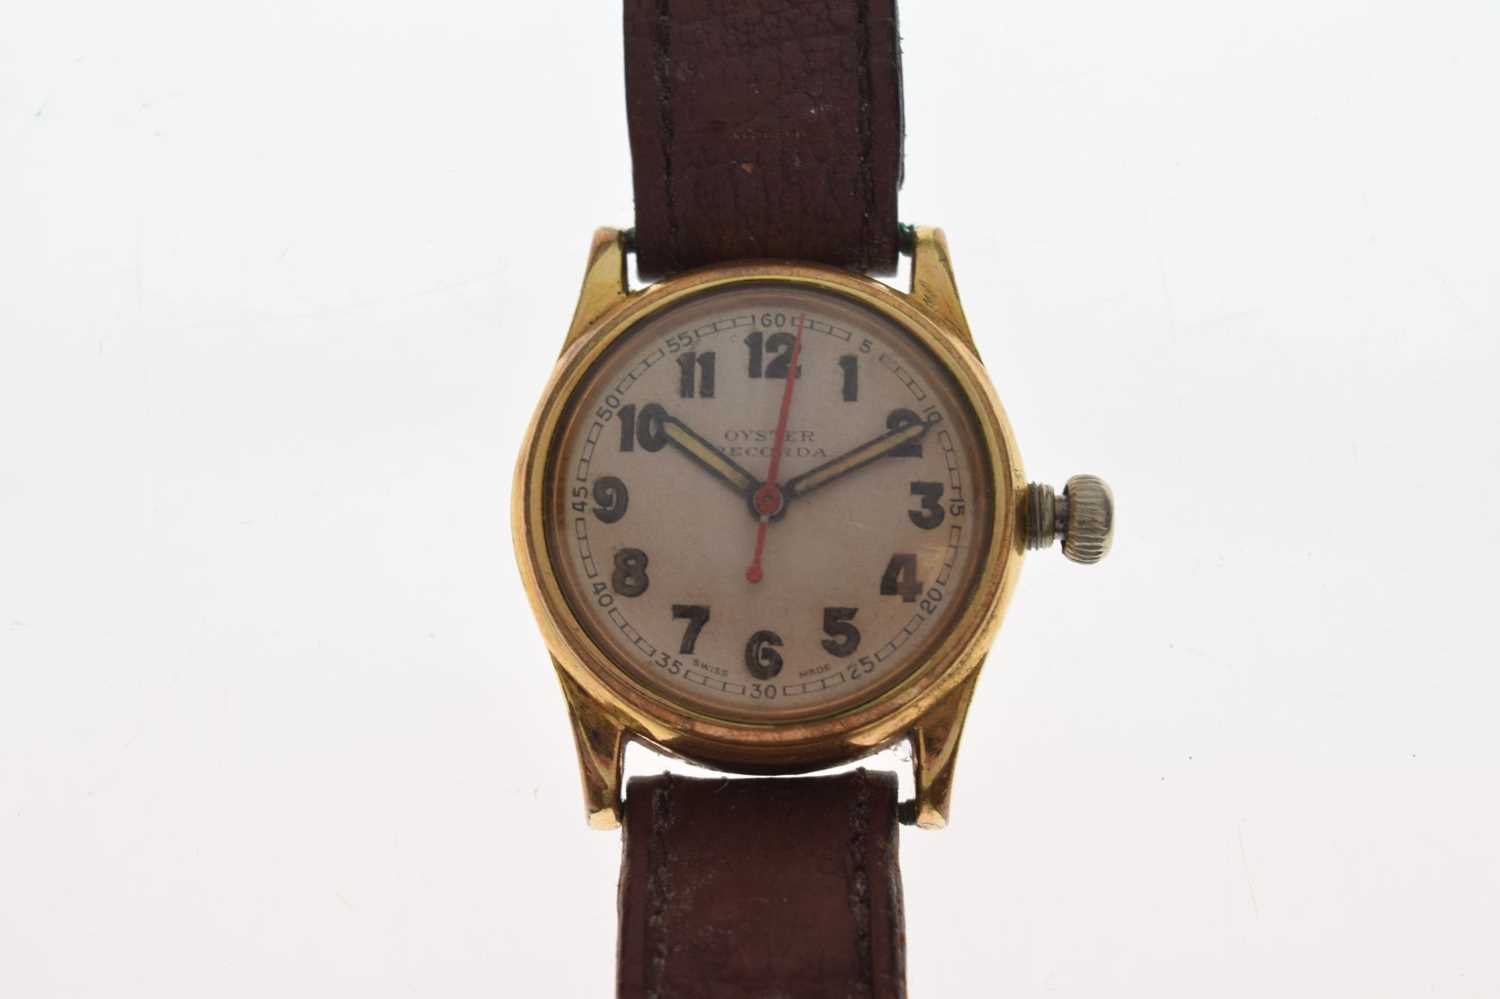 Rolex - 1940s Oyster Recorda manual wind wristwatch - Image 10 of 10